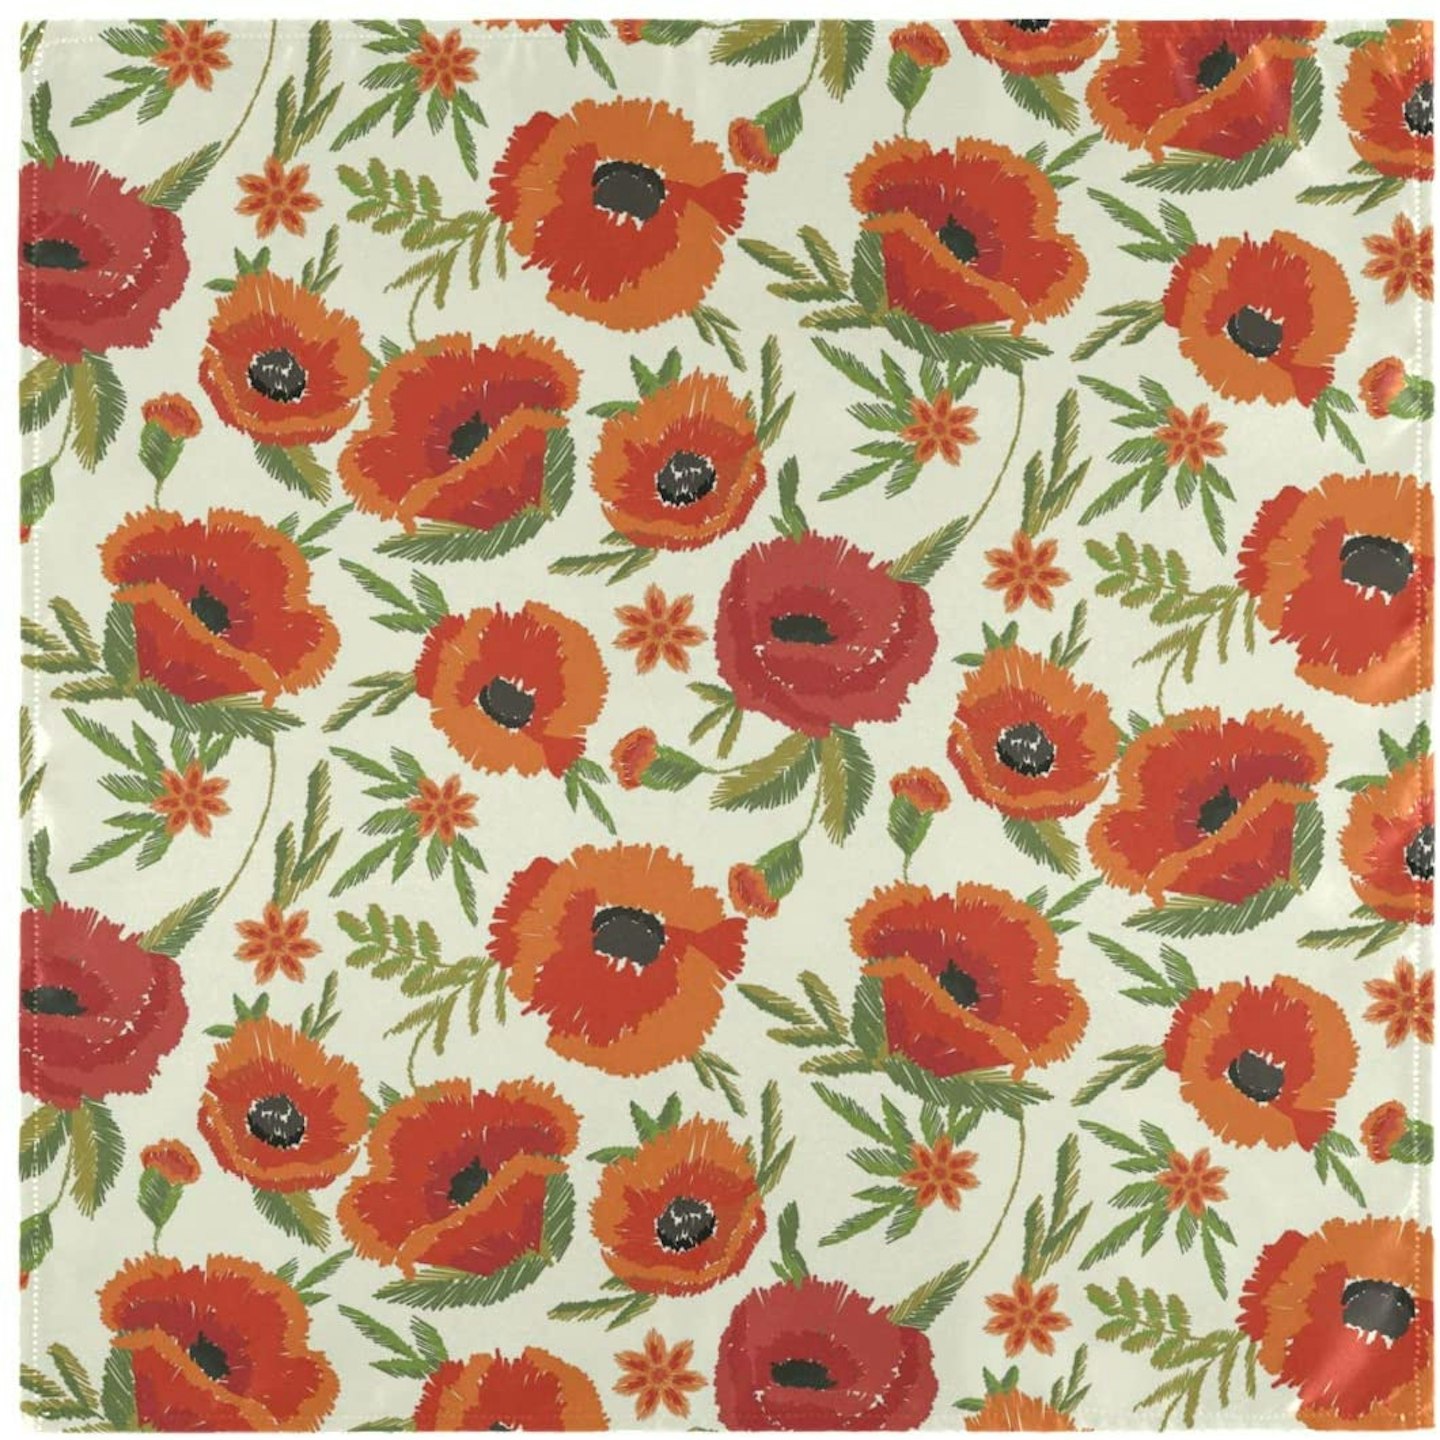 Naanle Poppy Floral Cloth